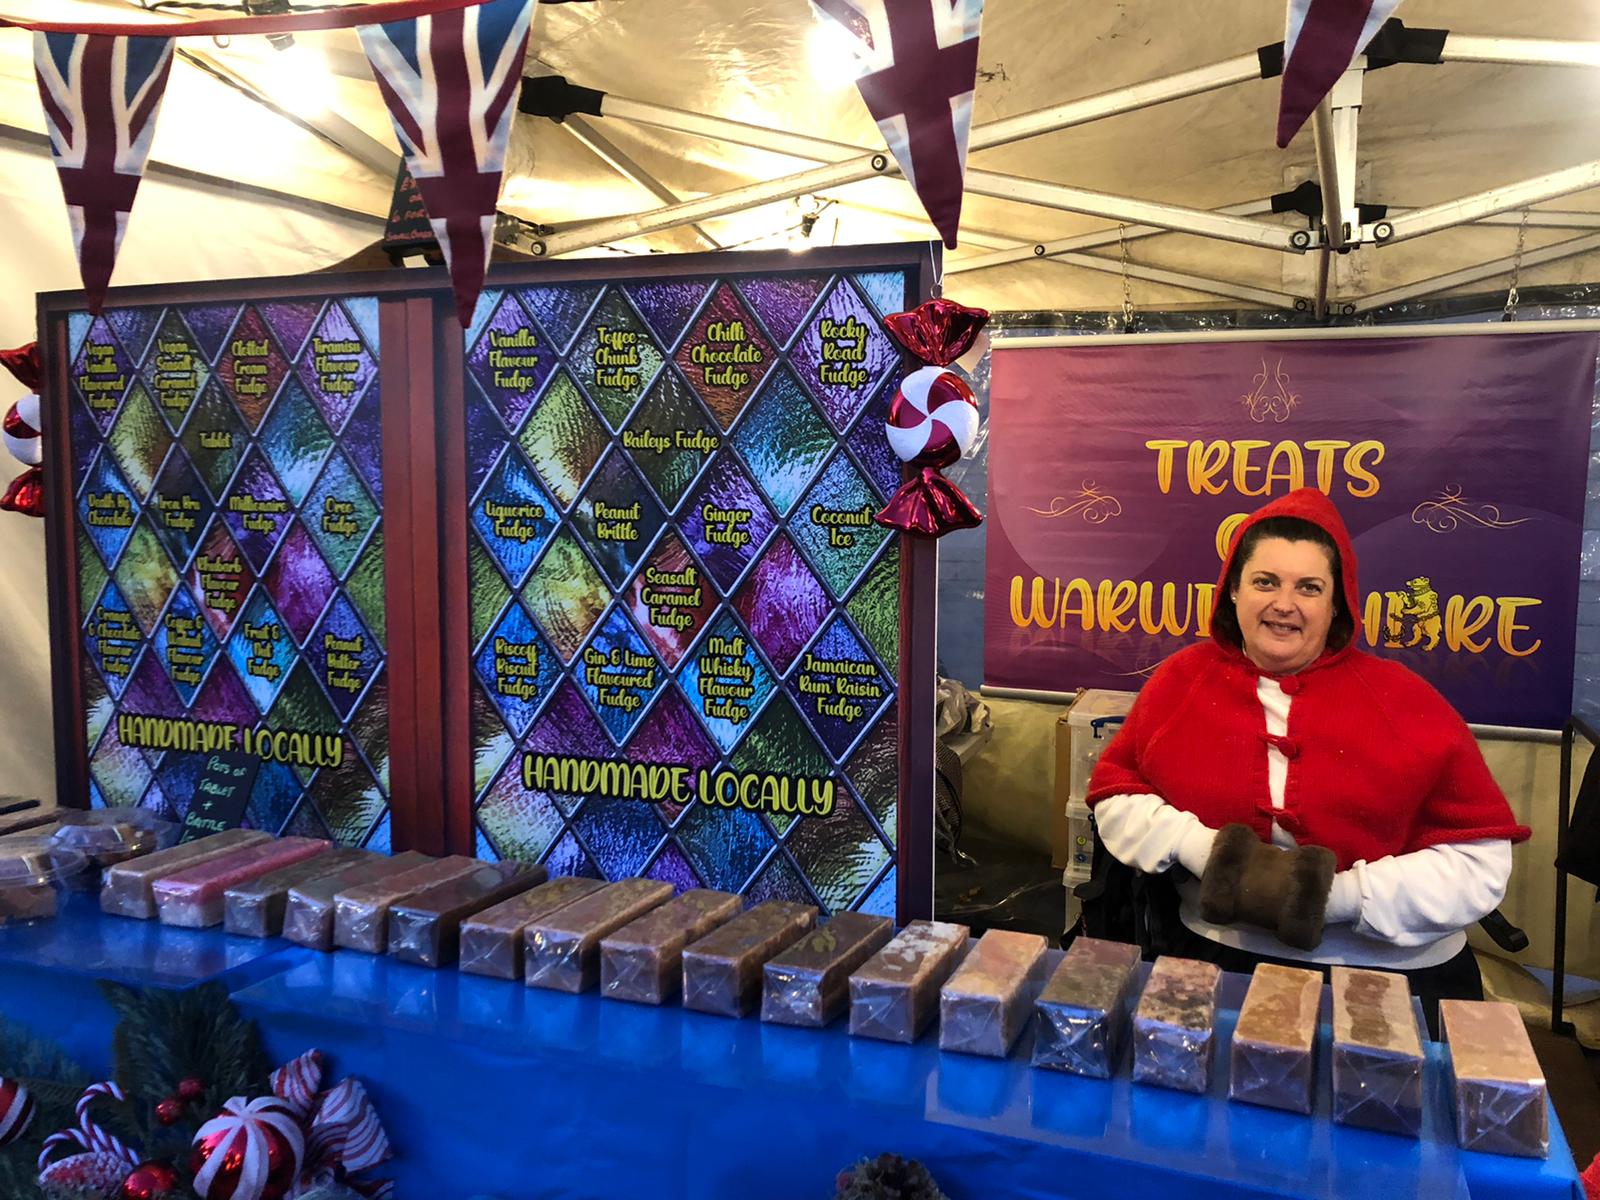 Liz sits at Treats of Warwickshire fudge stand, showcasing many bars of fudge and wearing red hooded top.